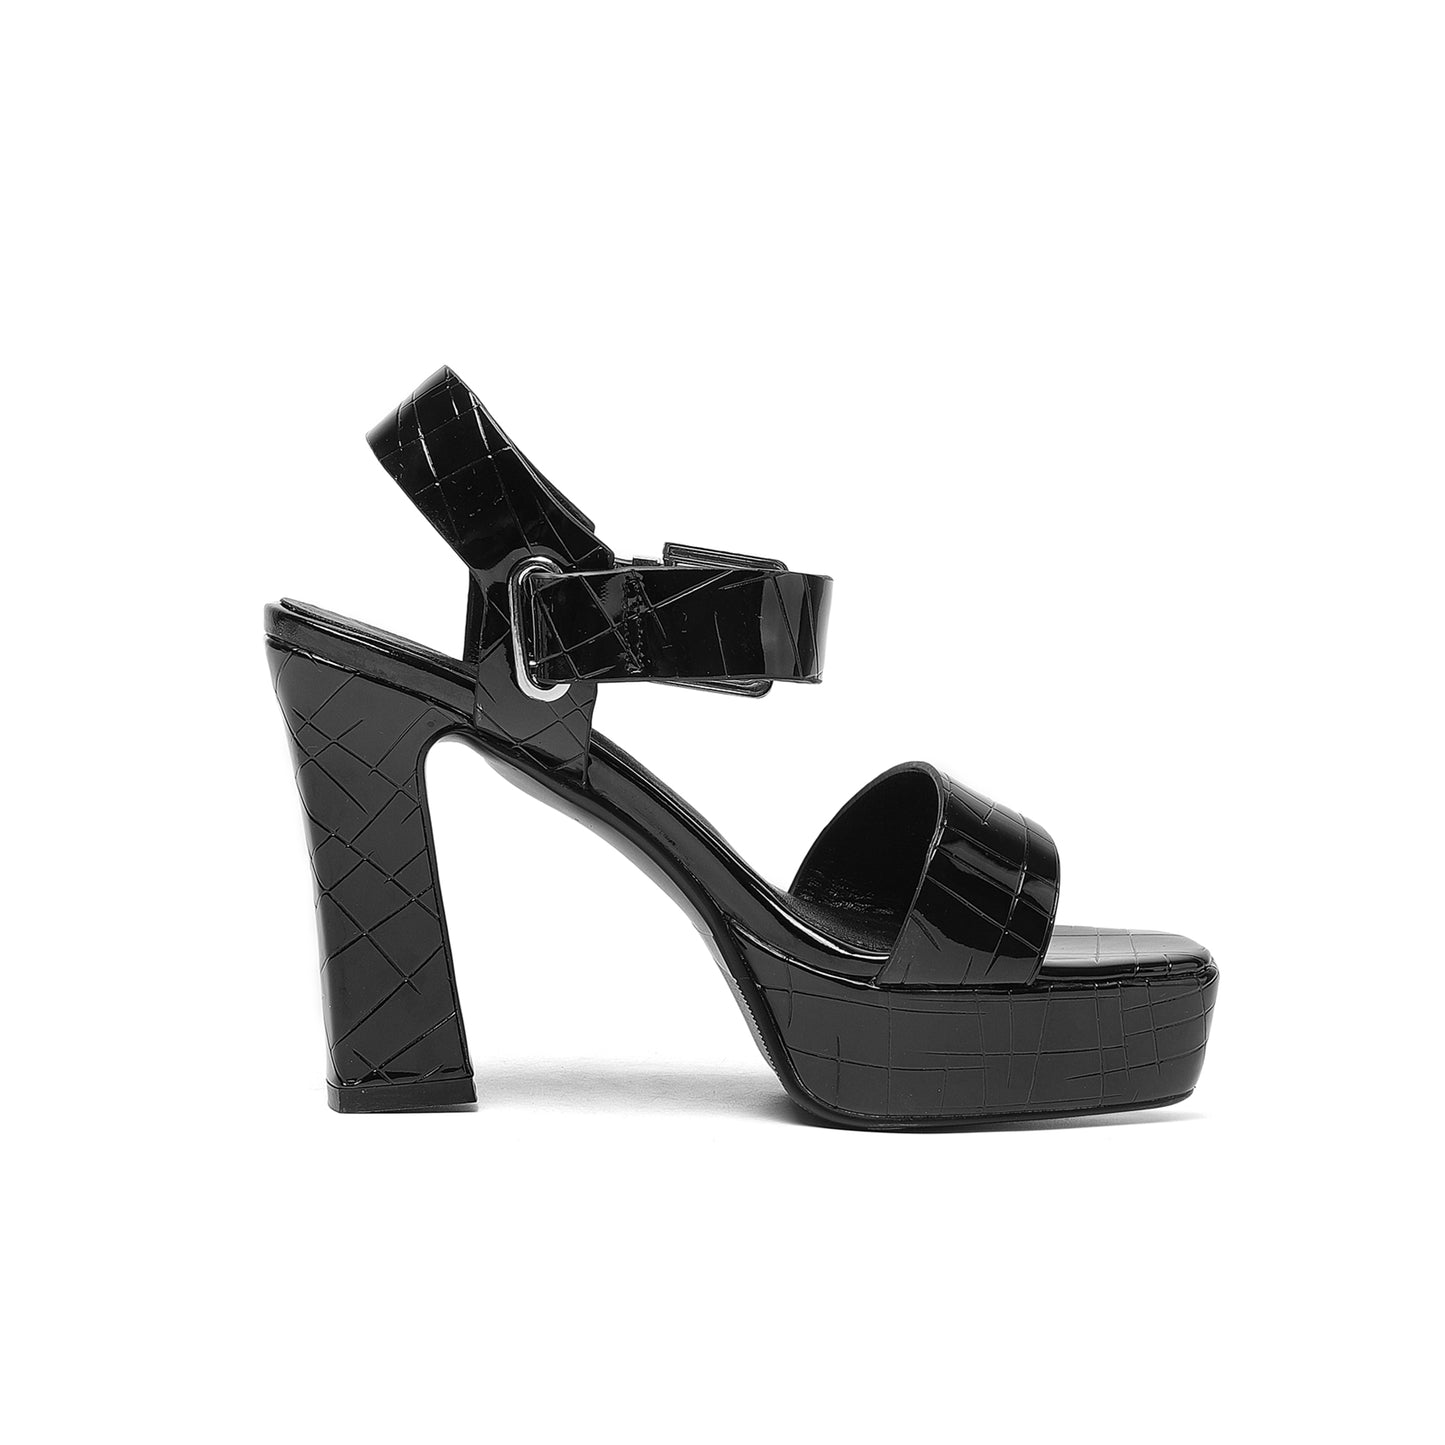 TinaCus Women's Patent Leather Handmade Buckle Chic High Chunky Heel Sandals with Platform